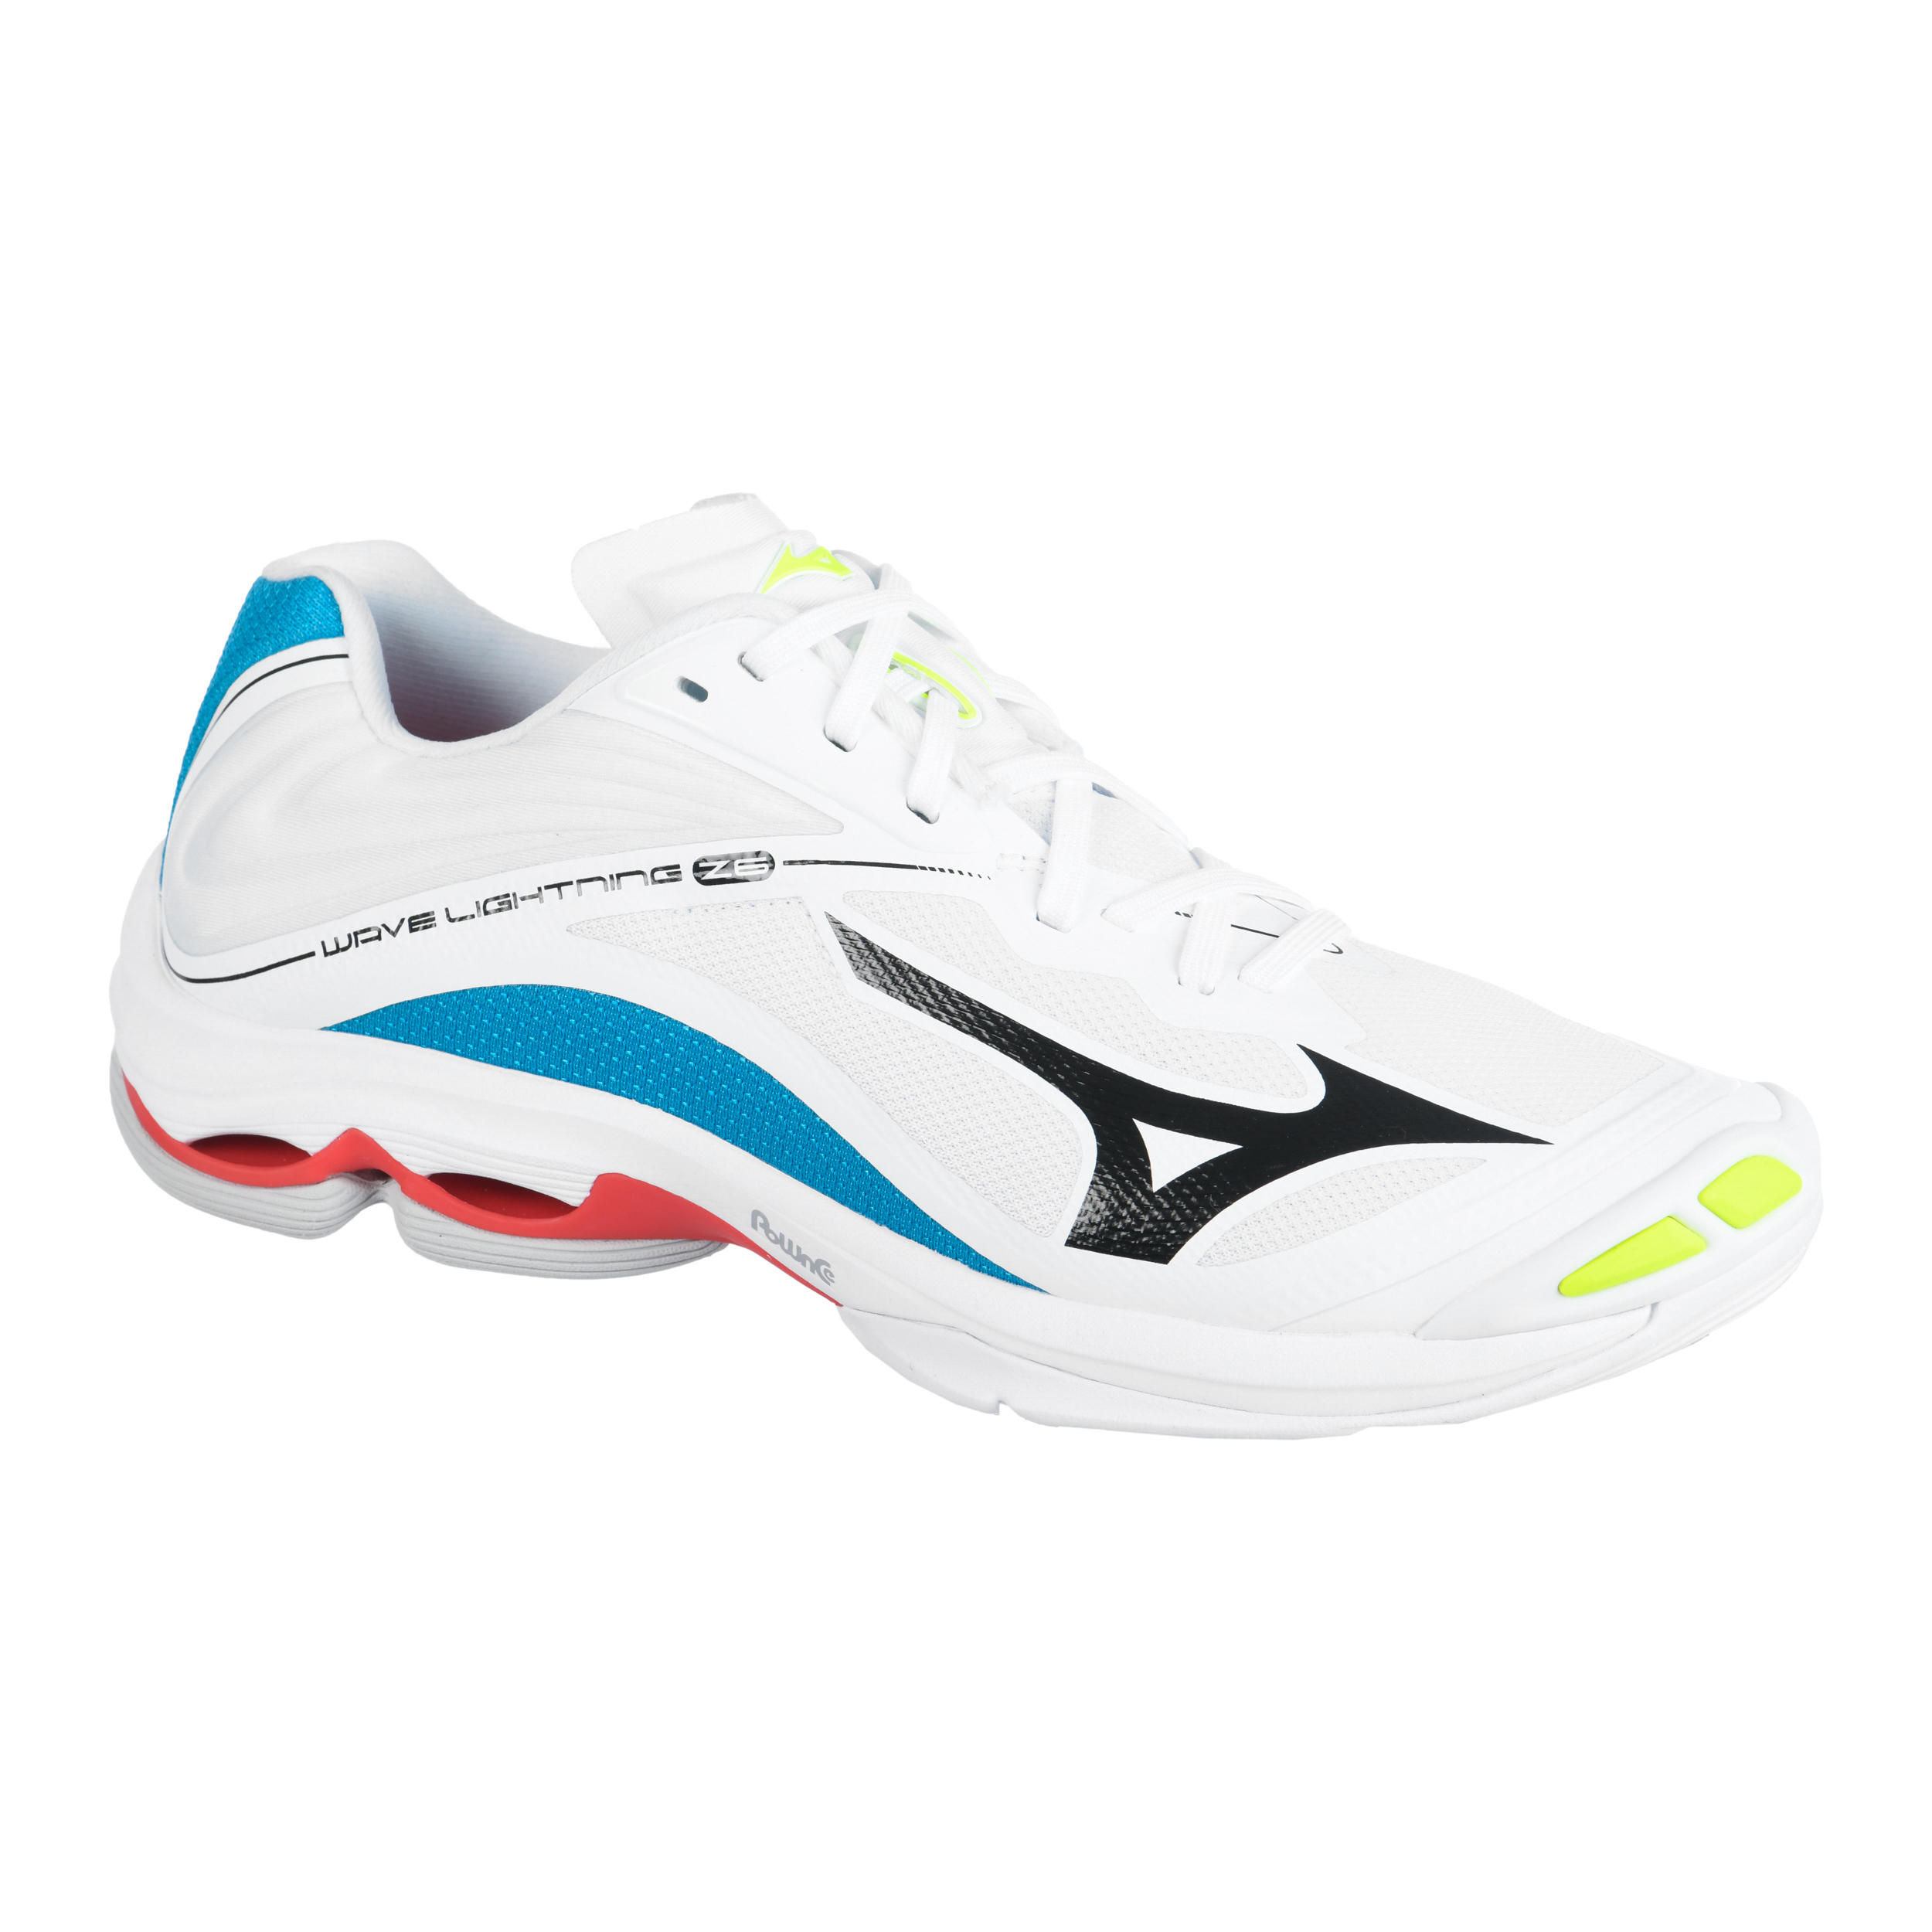 Men's Volleyball Shoes Lightning Z6 - White 1/8